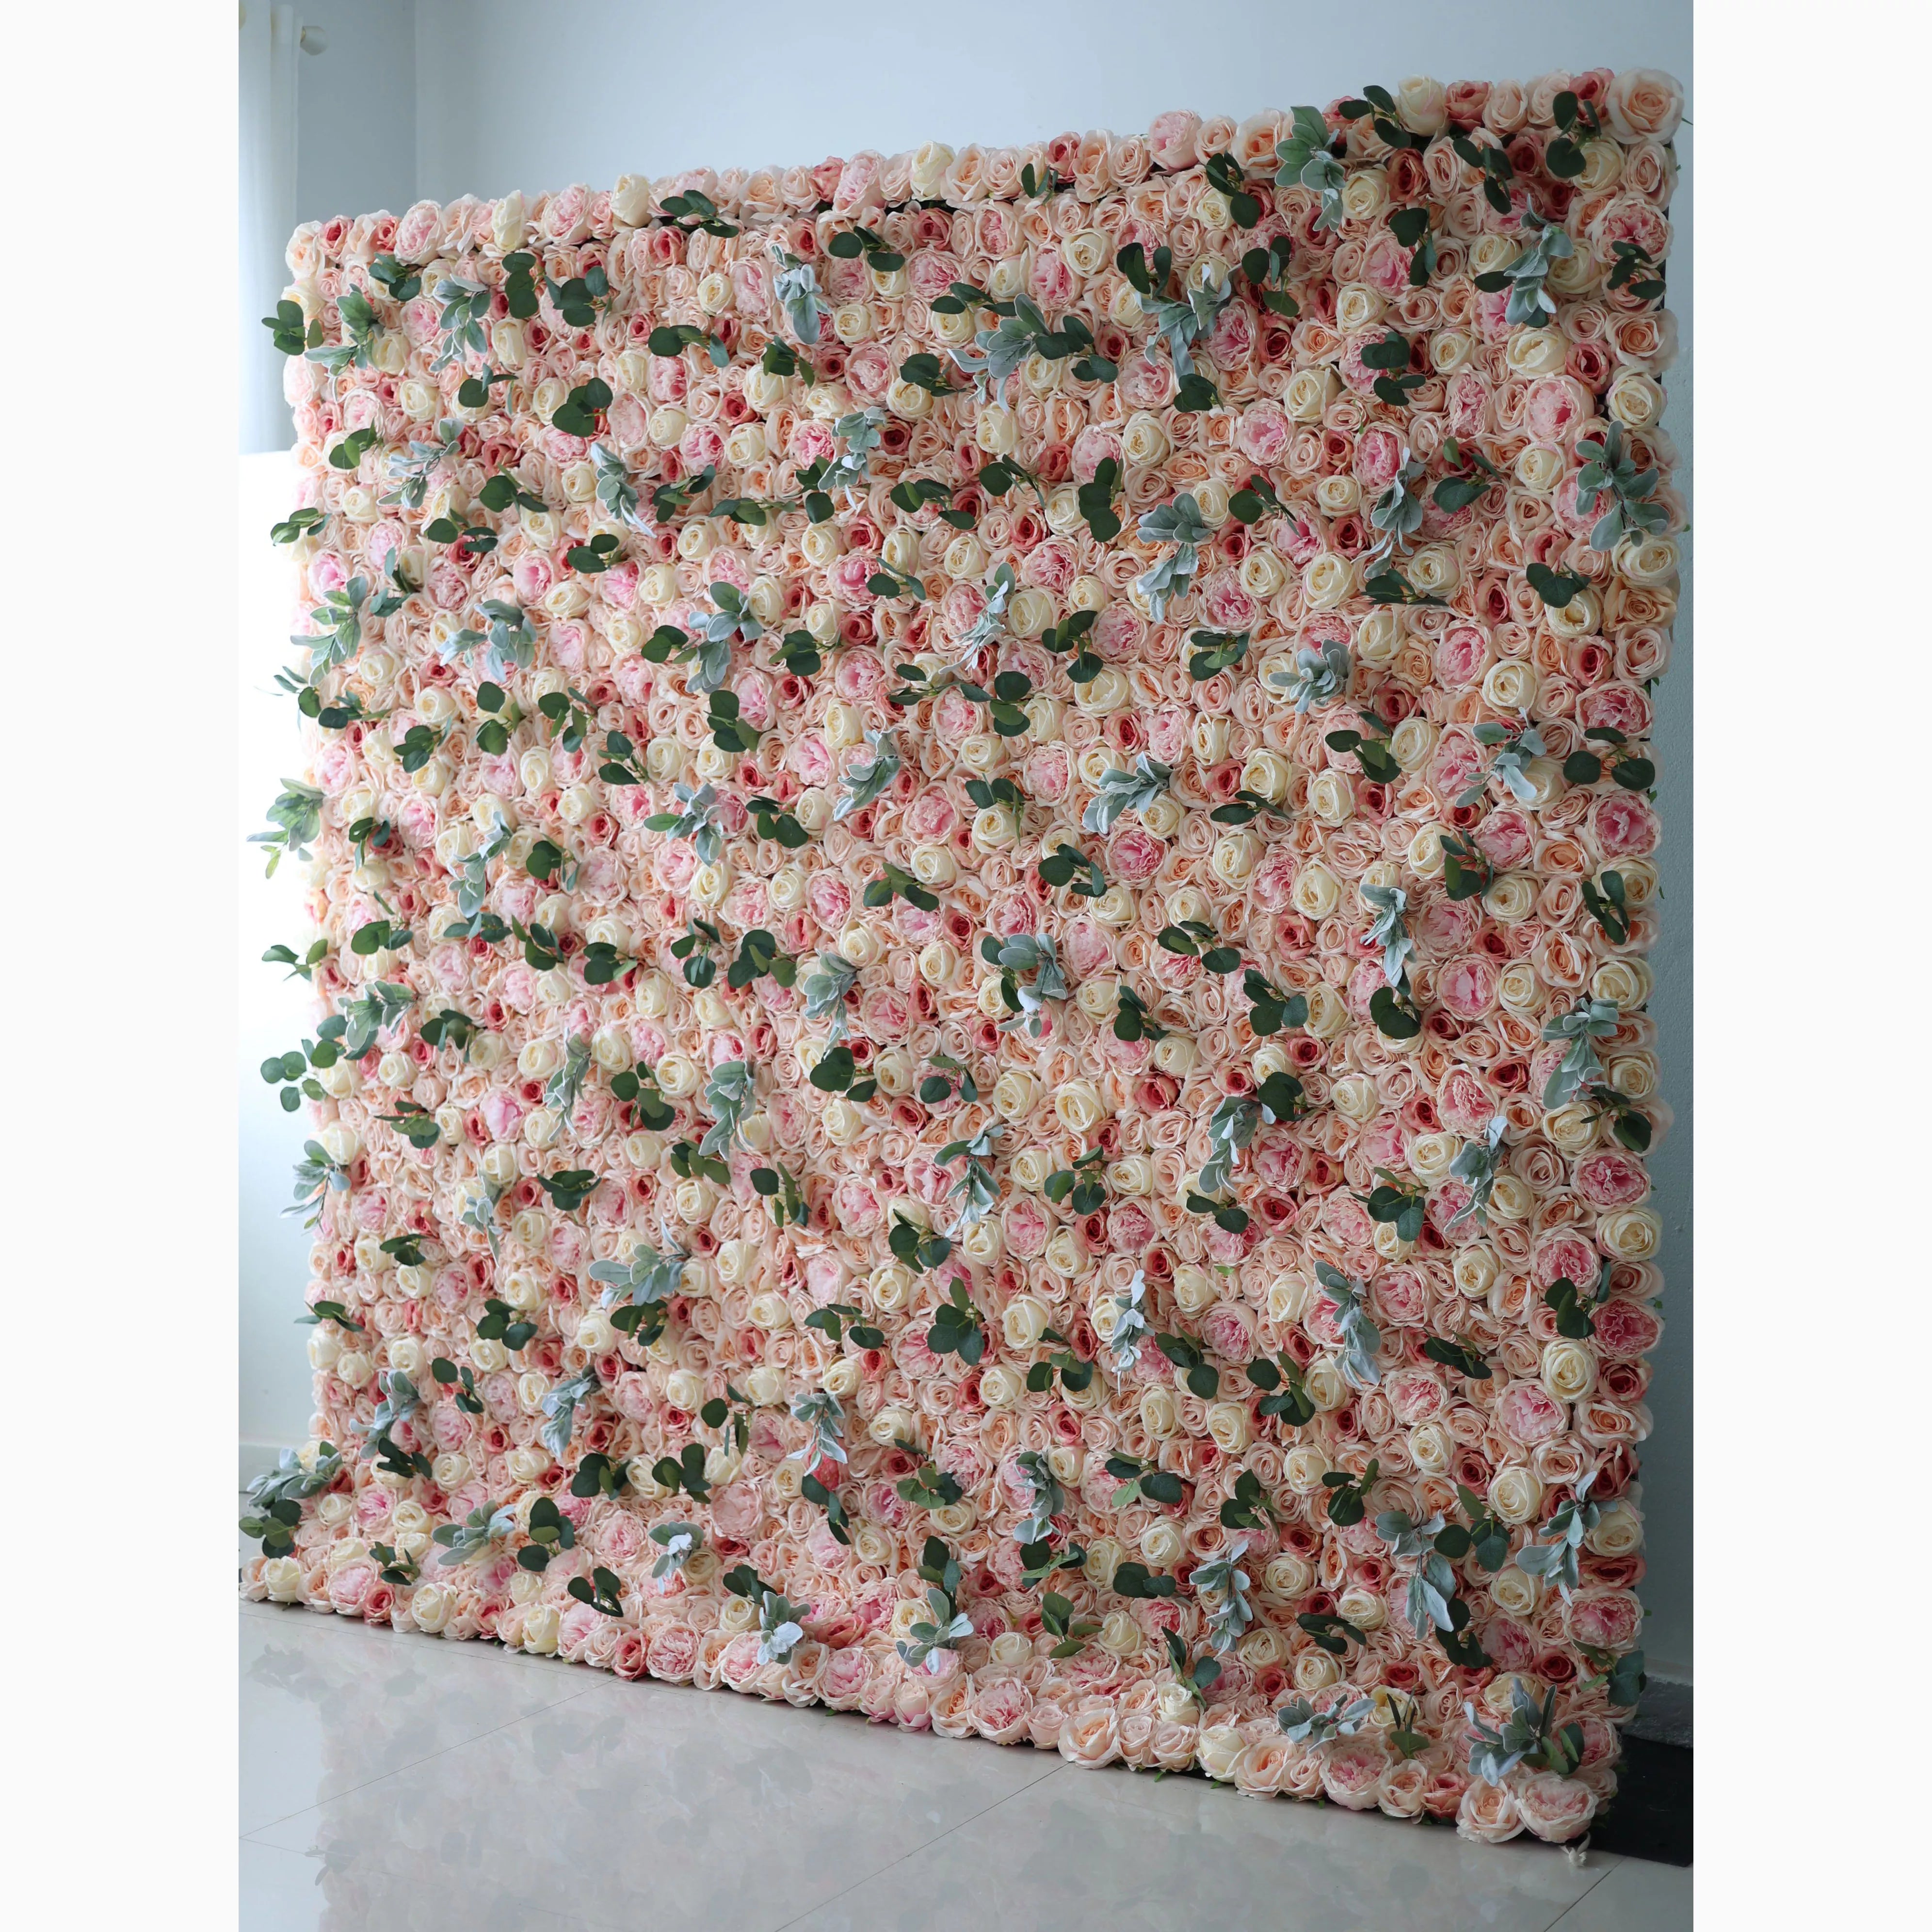 Valar Flowers' Artificial Fabric Flower Wall: Peach Blossom Euphoria. Dive into rosy blush and creamy peach blooms, crafting an everlasting spring and romantic ambiance.